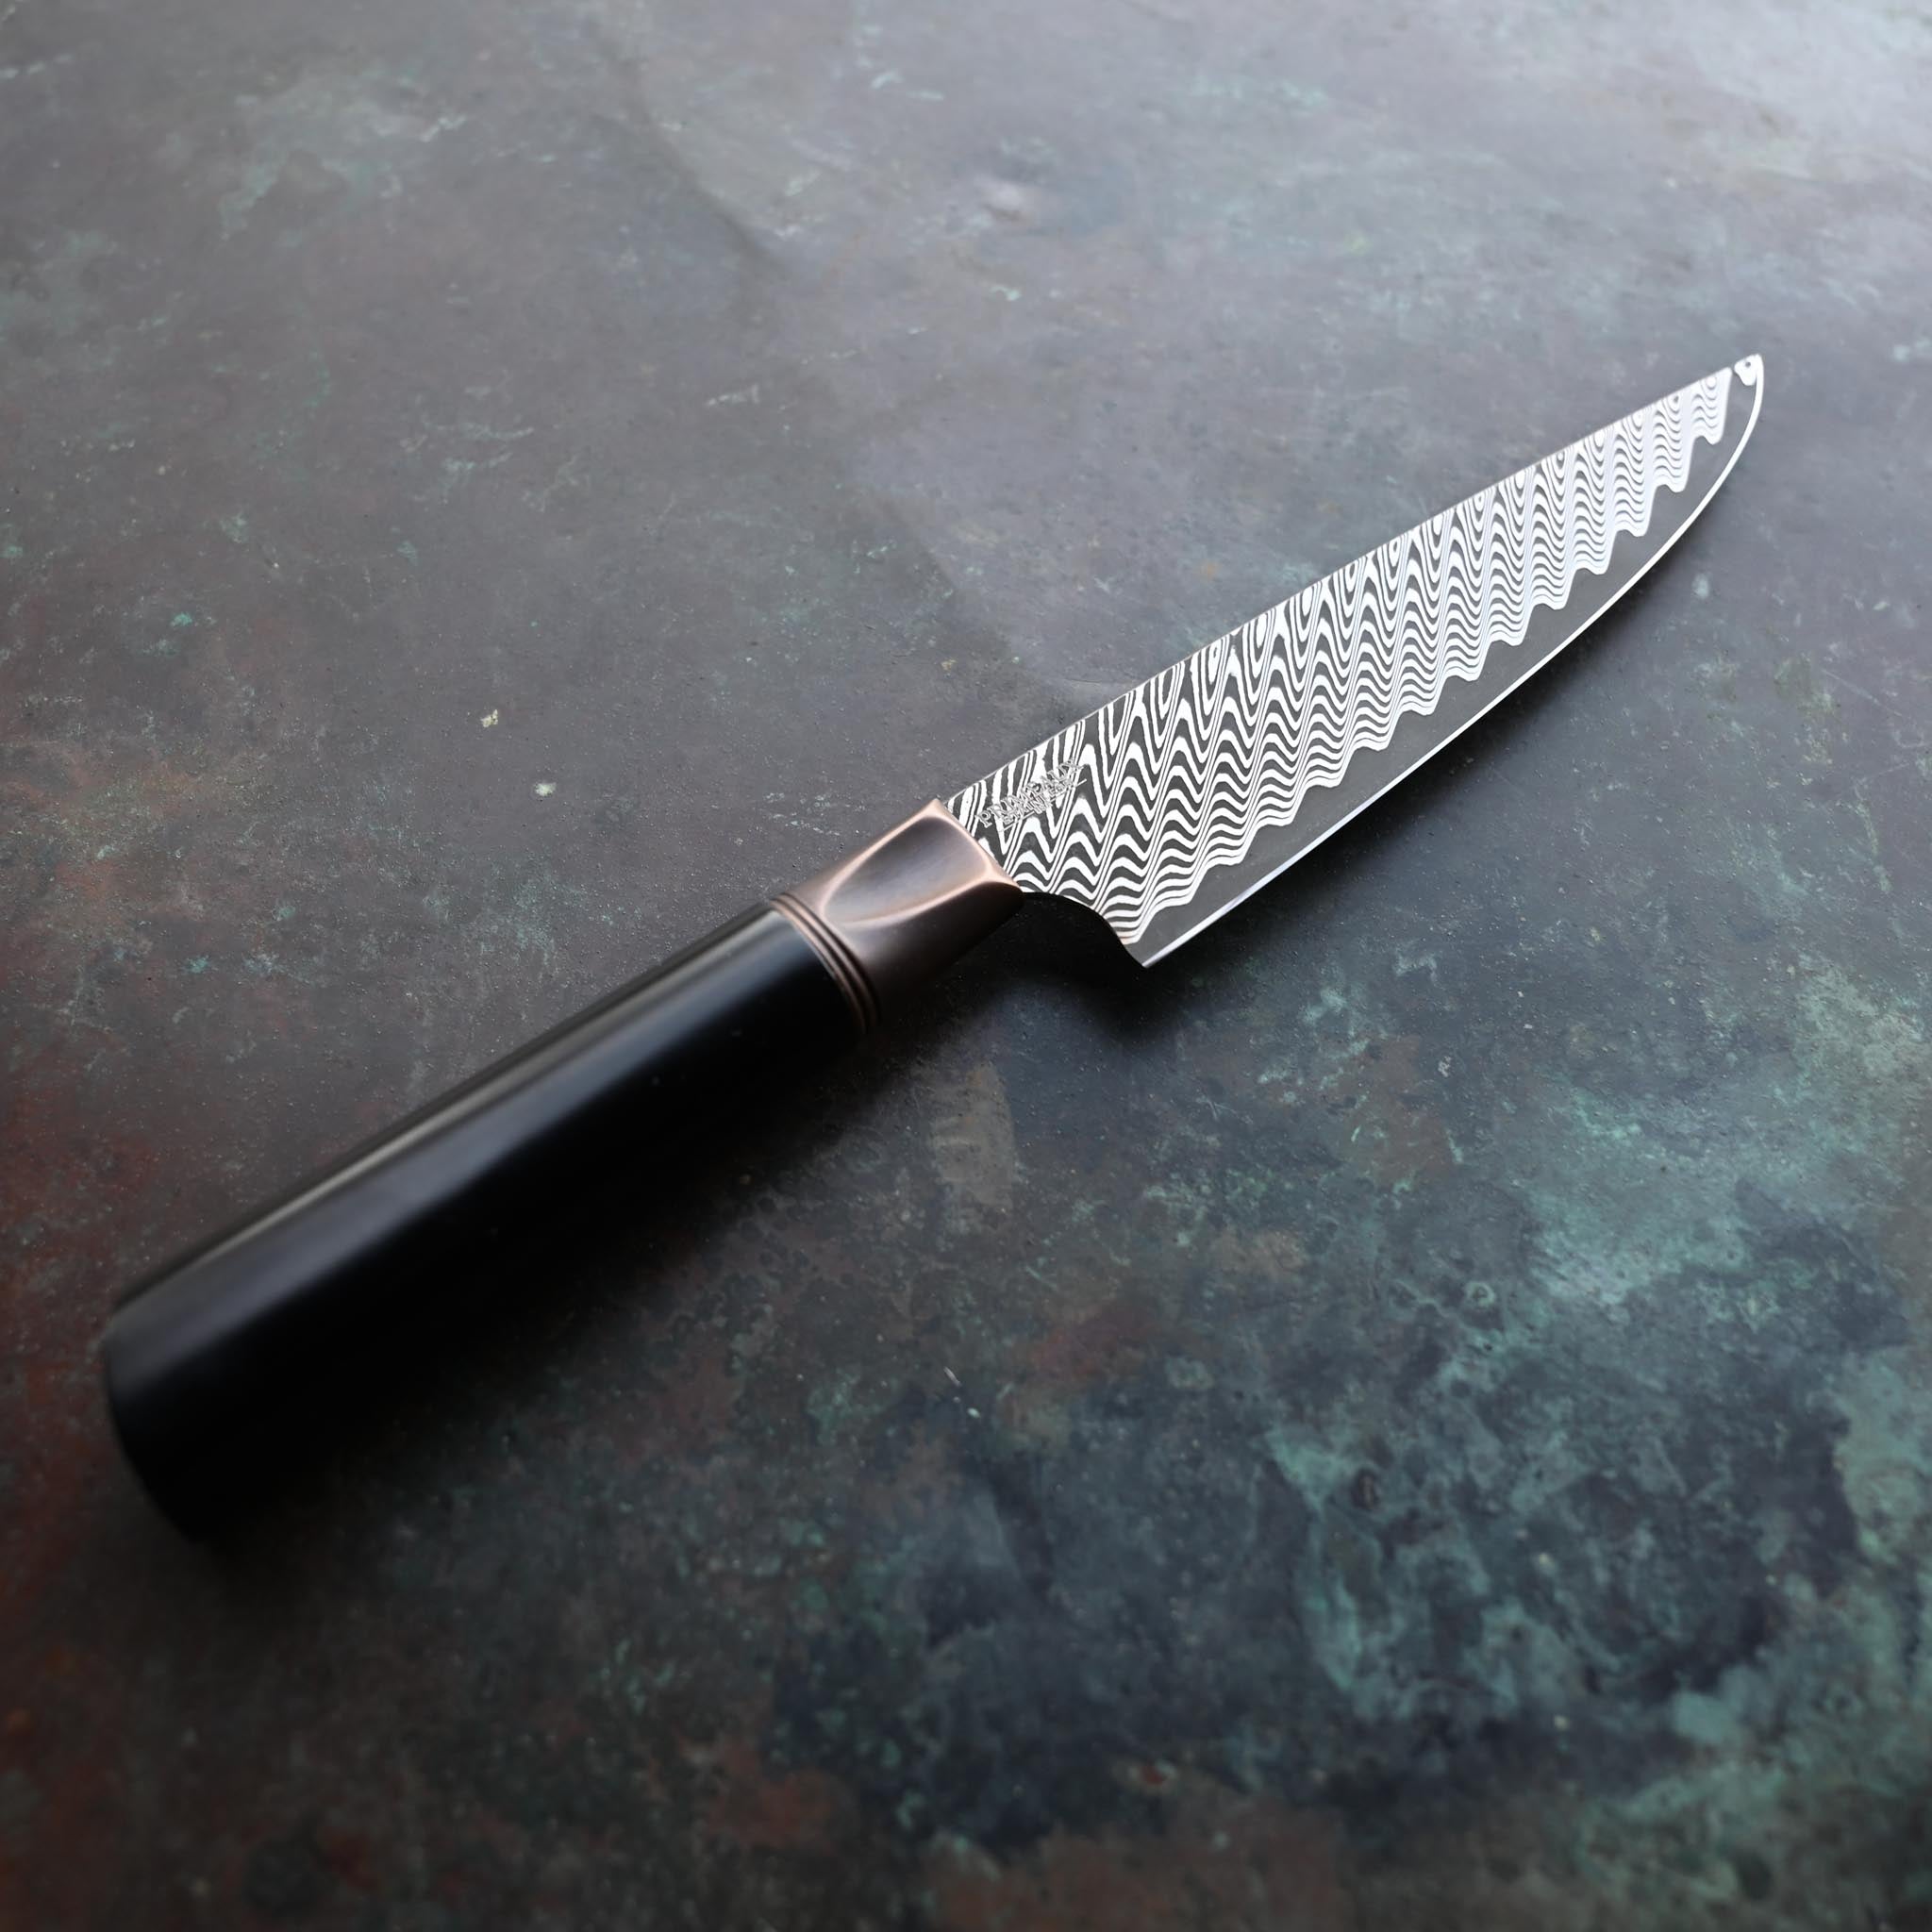 DAMASCUS STEEL PETTY KNIFE WITH ANTIQUE BOLSTER AND BLACK HANDLE ON CONCRETE BACKGROUND